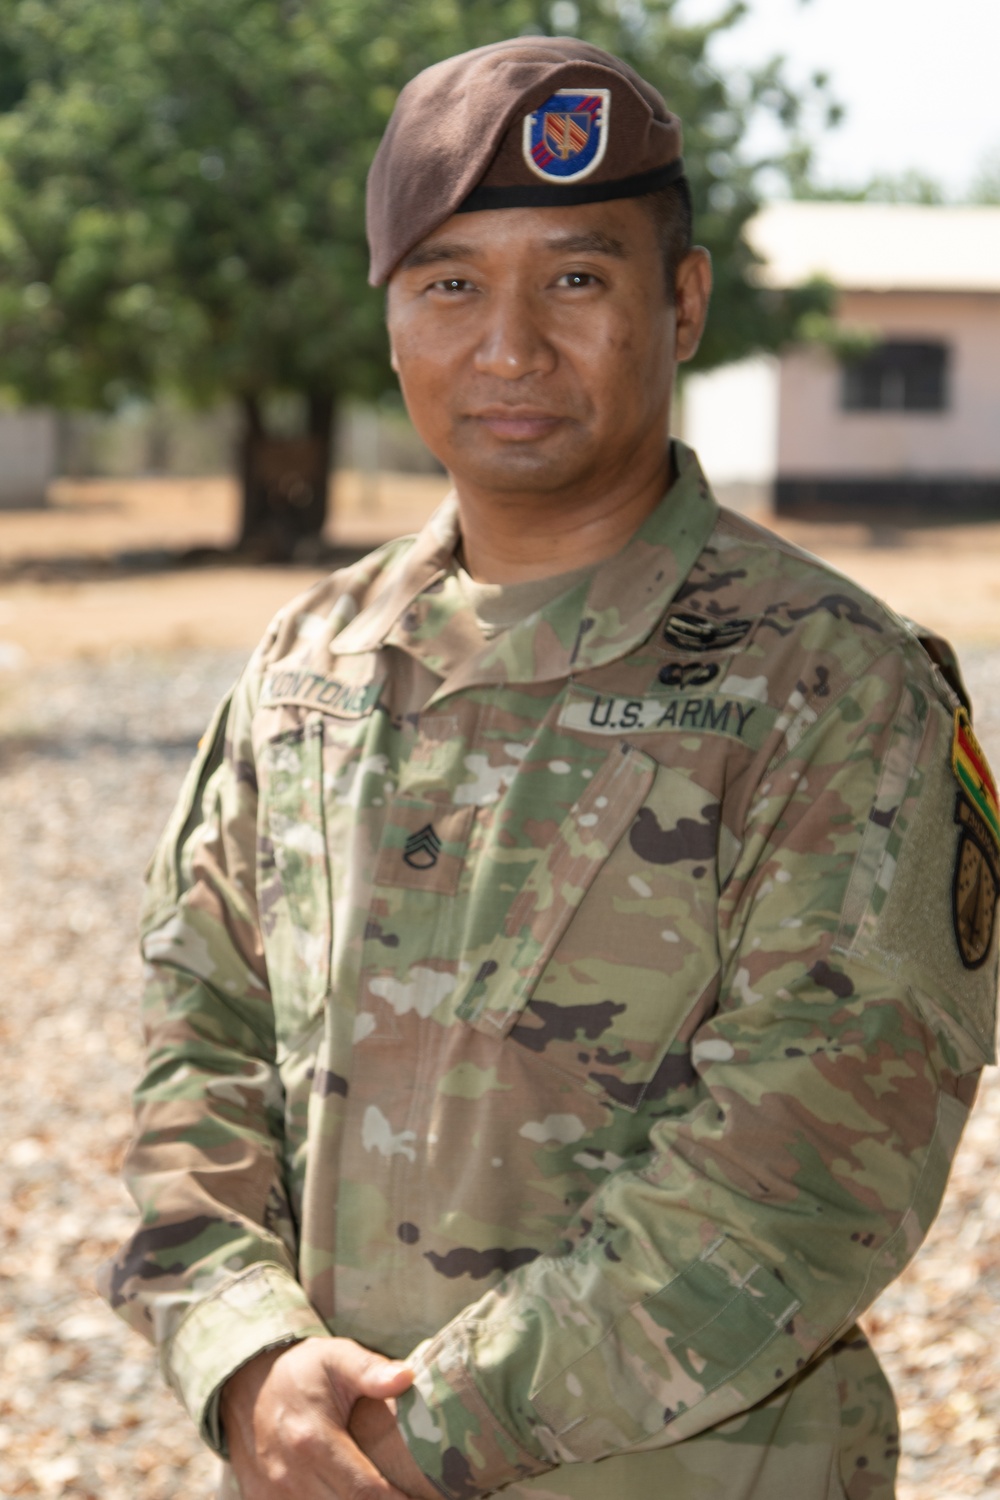 Staff Sgt. William Kontong: Representing his country through service